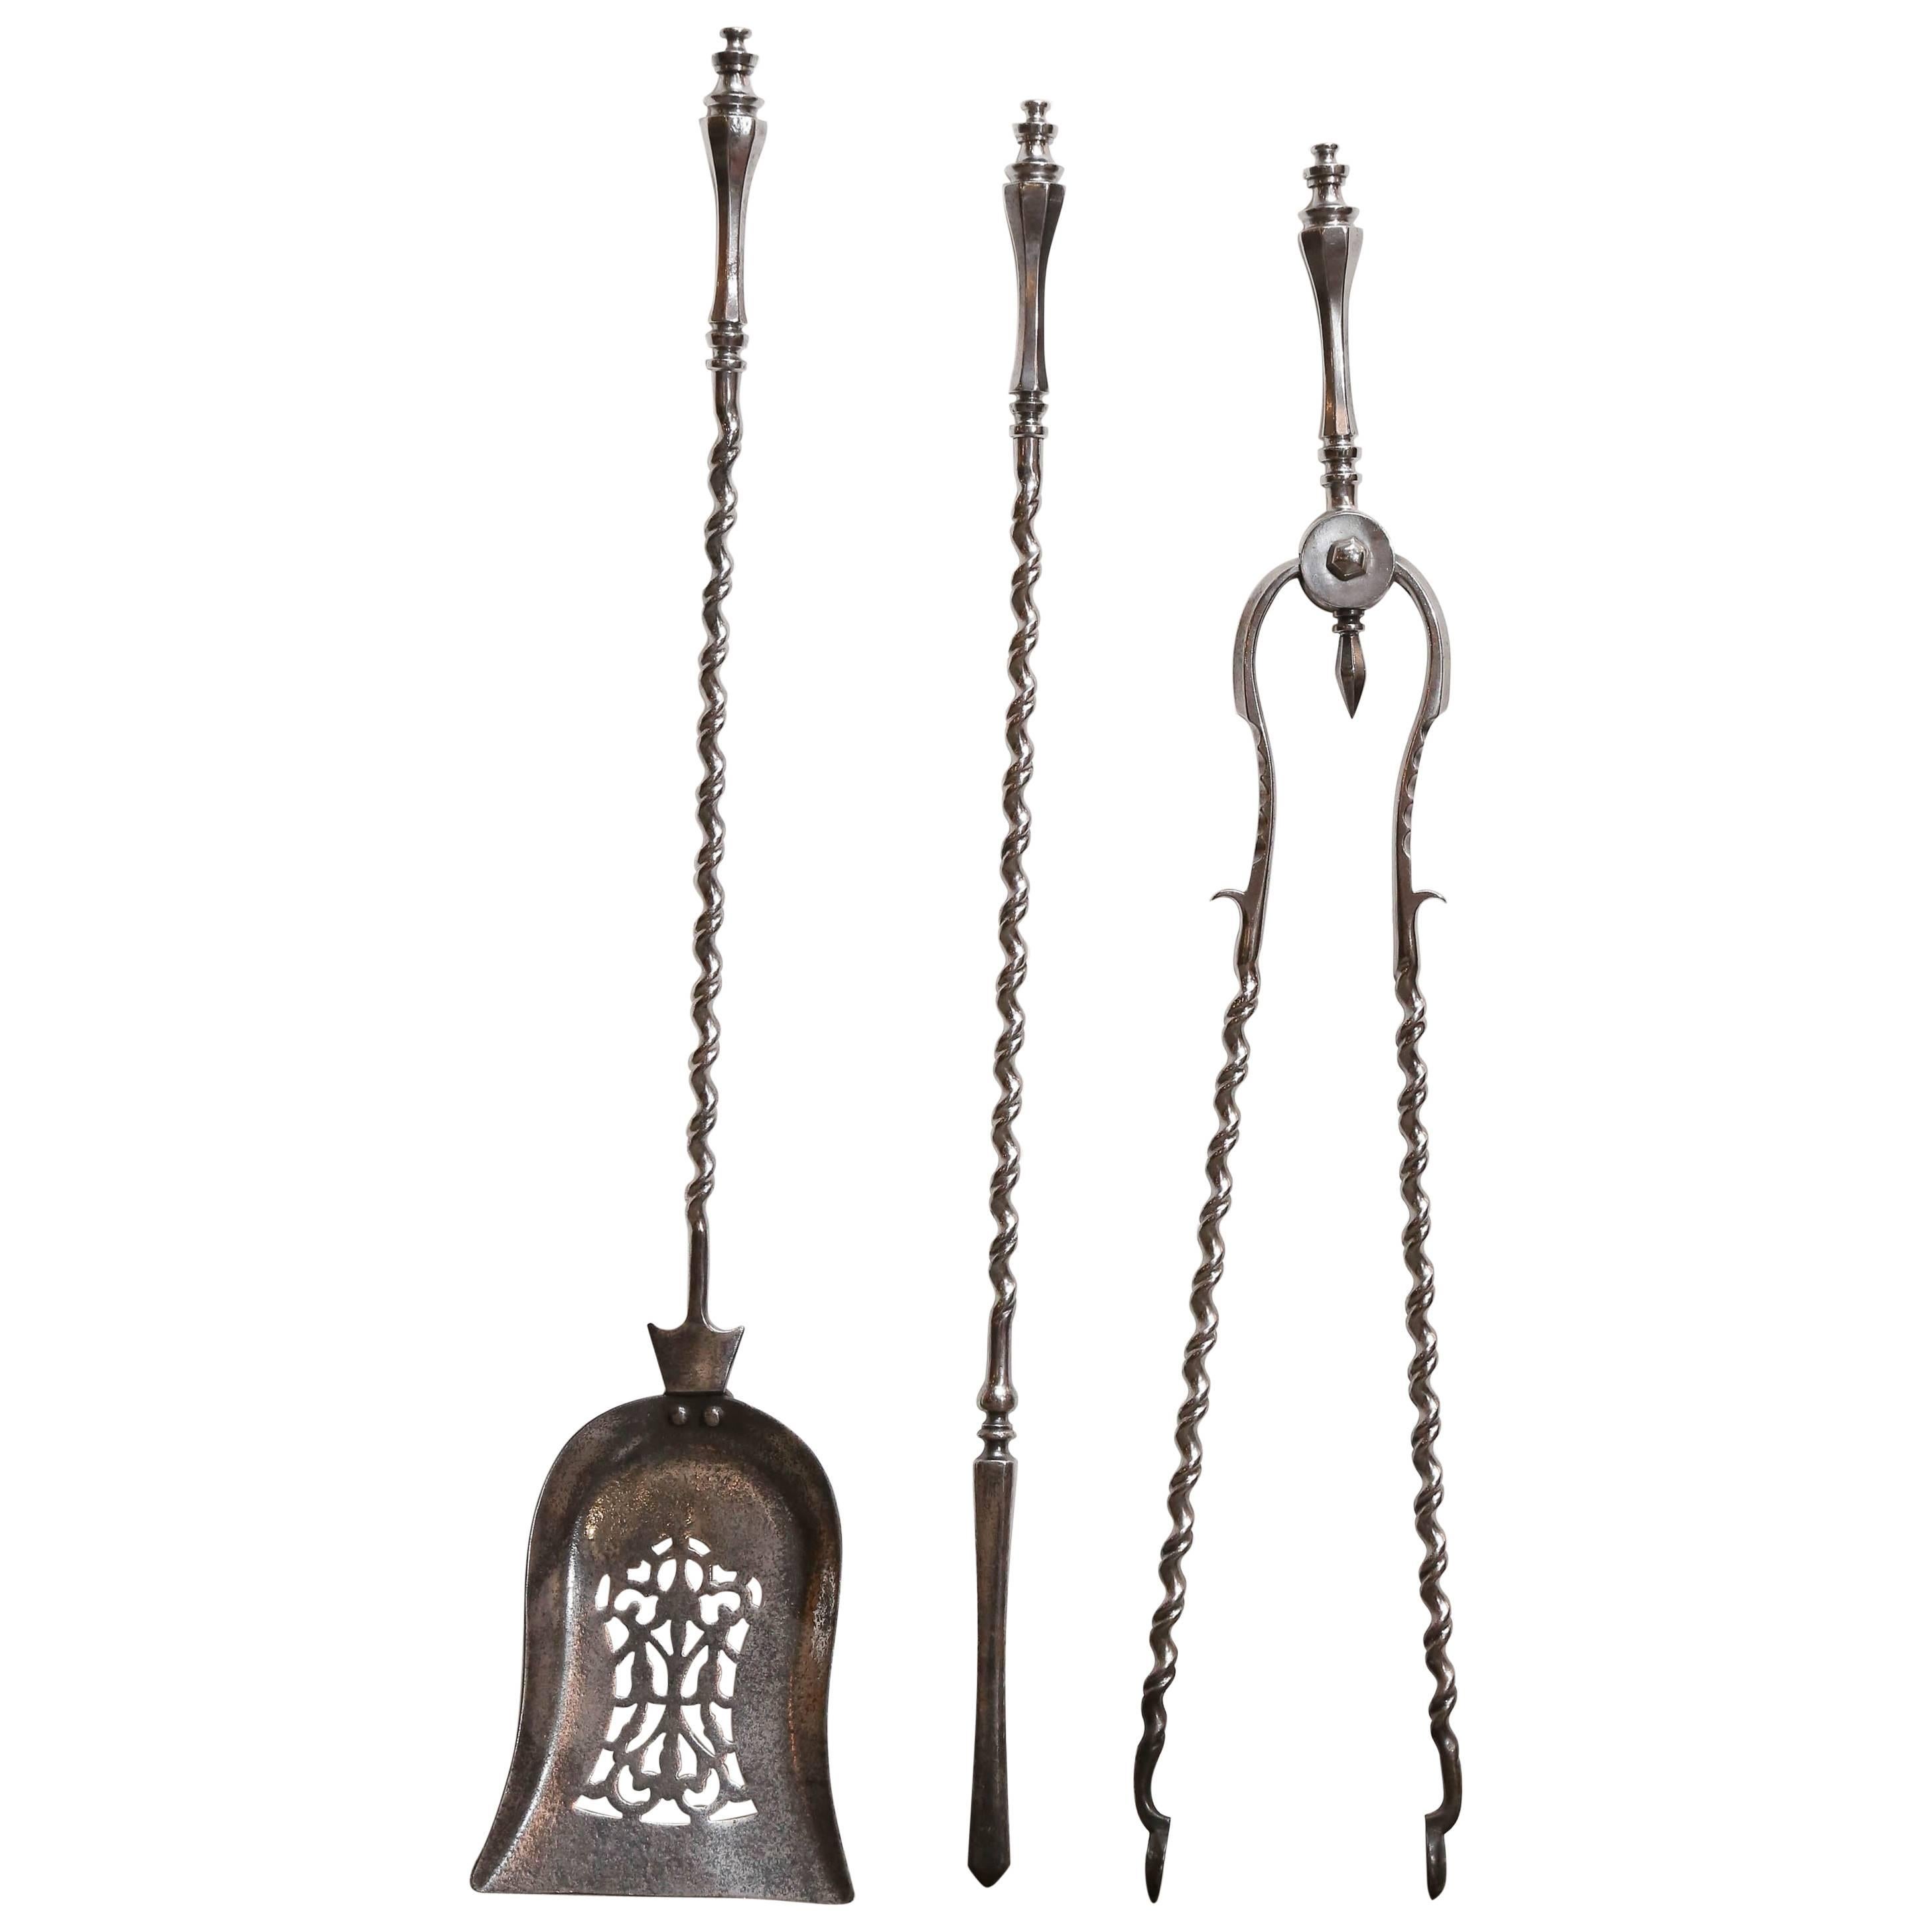 Three-Piece Set of 19th Century Polished Steel Fireplace Tools For Sale